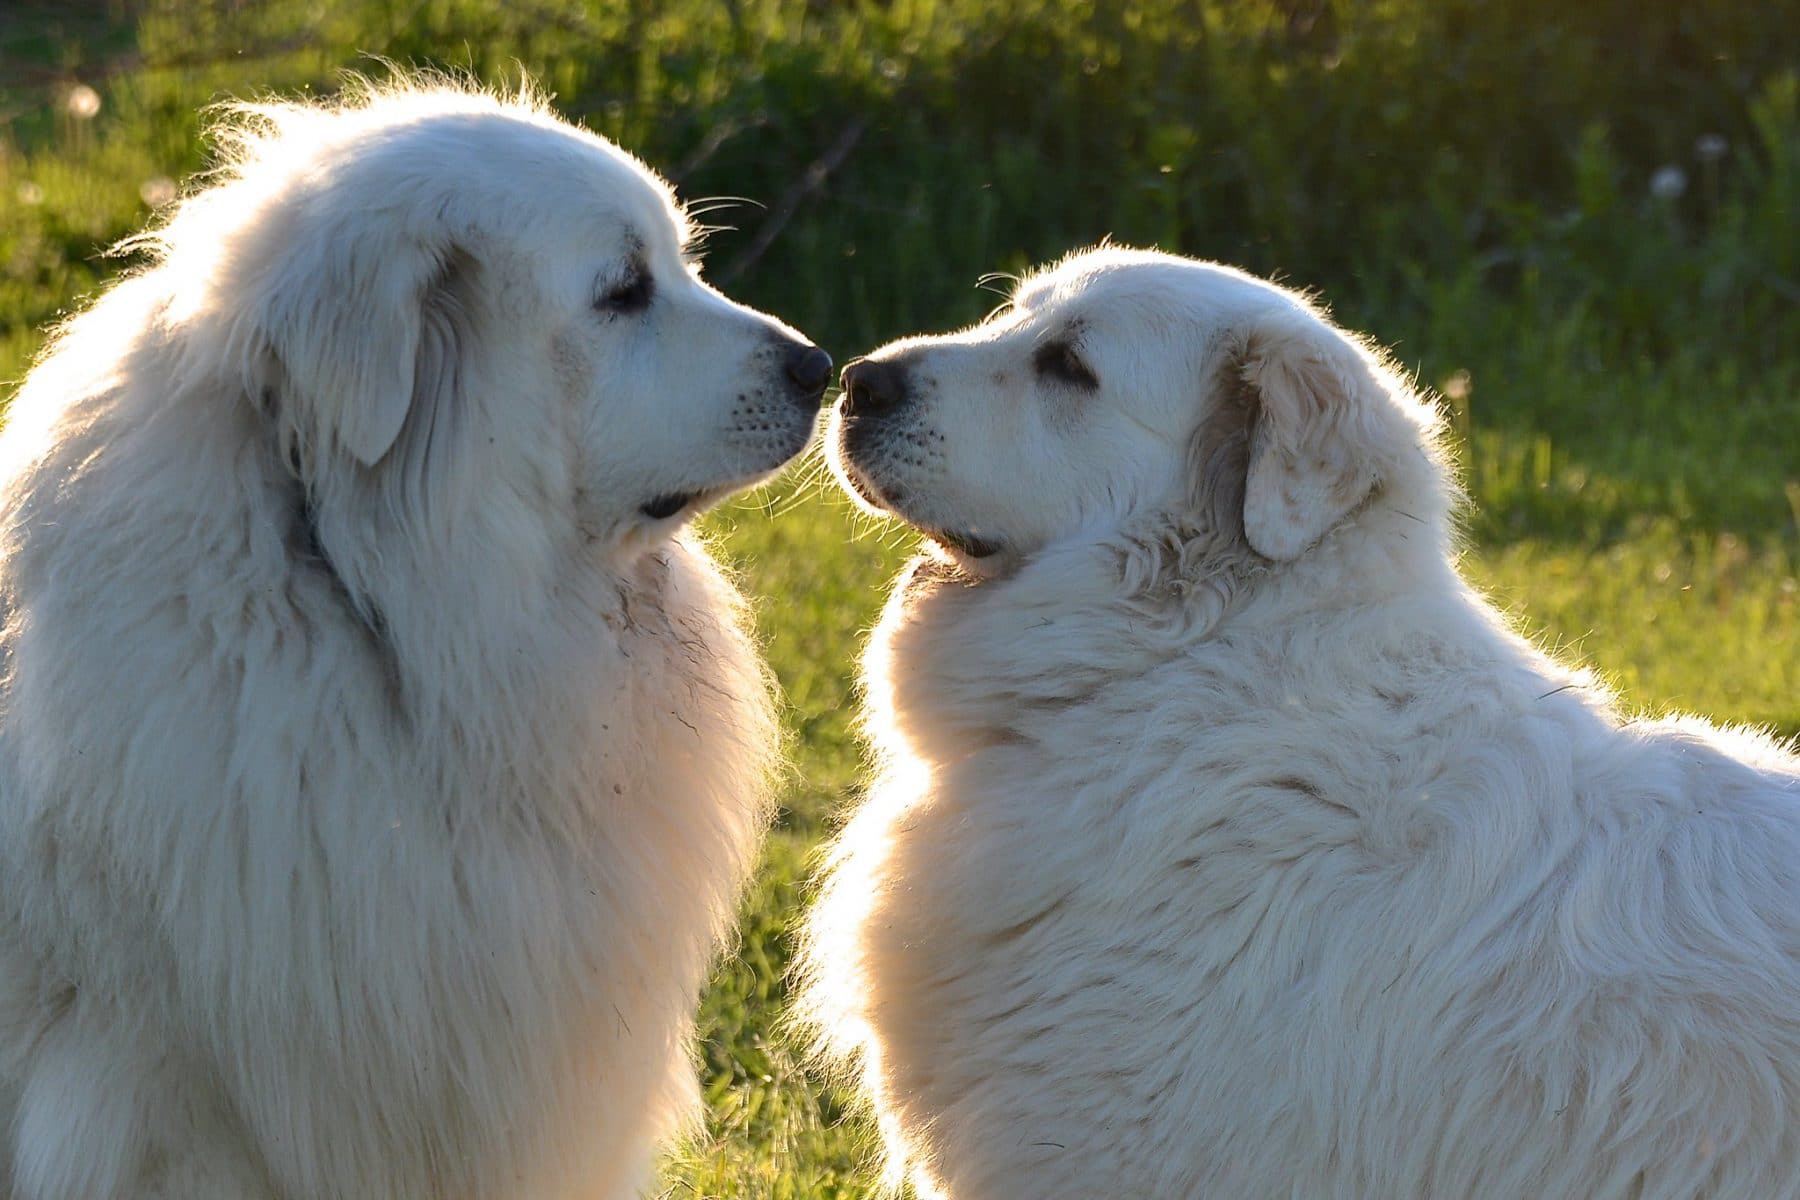 clippers for great pyrenees